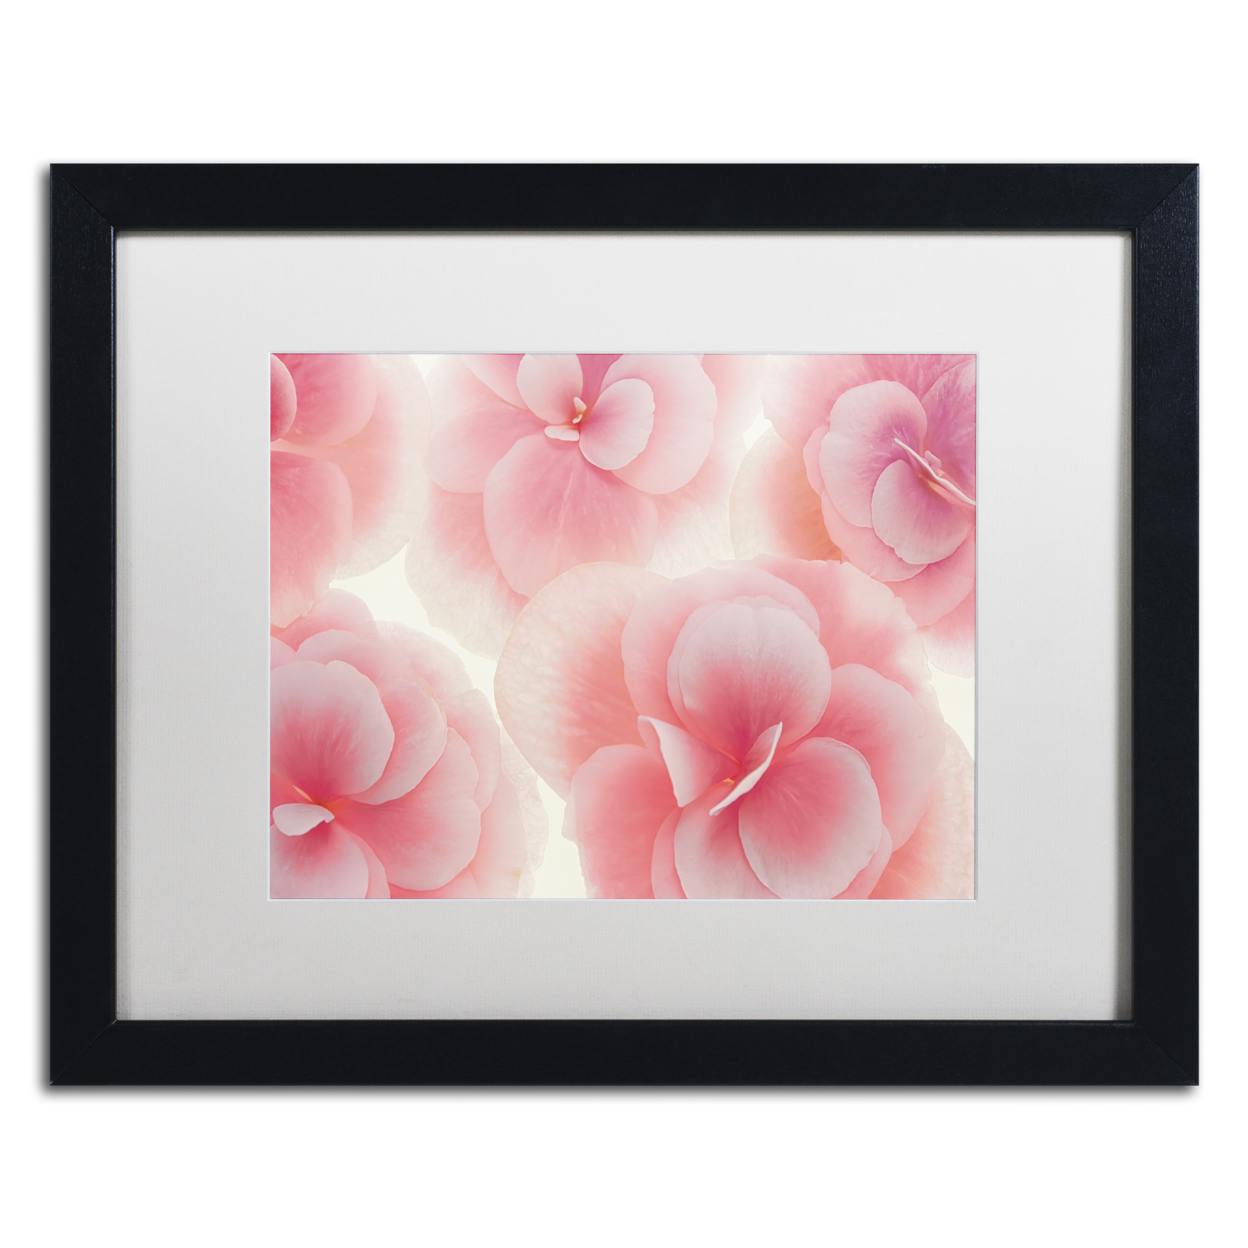 Cora Niele 'Rose Begonia Flowers' Black Wooden Framed Art 18 X 22 Inches